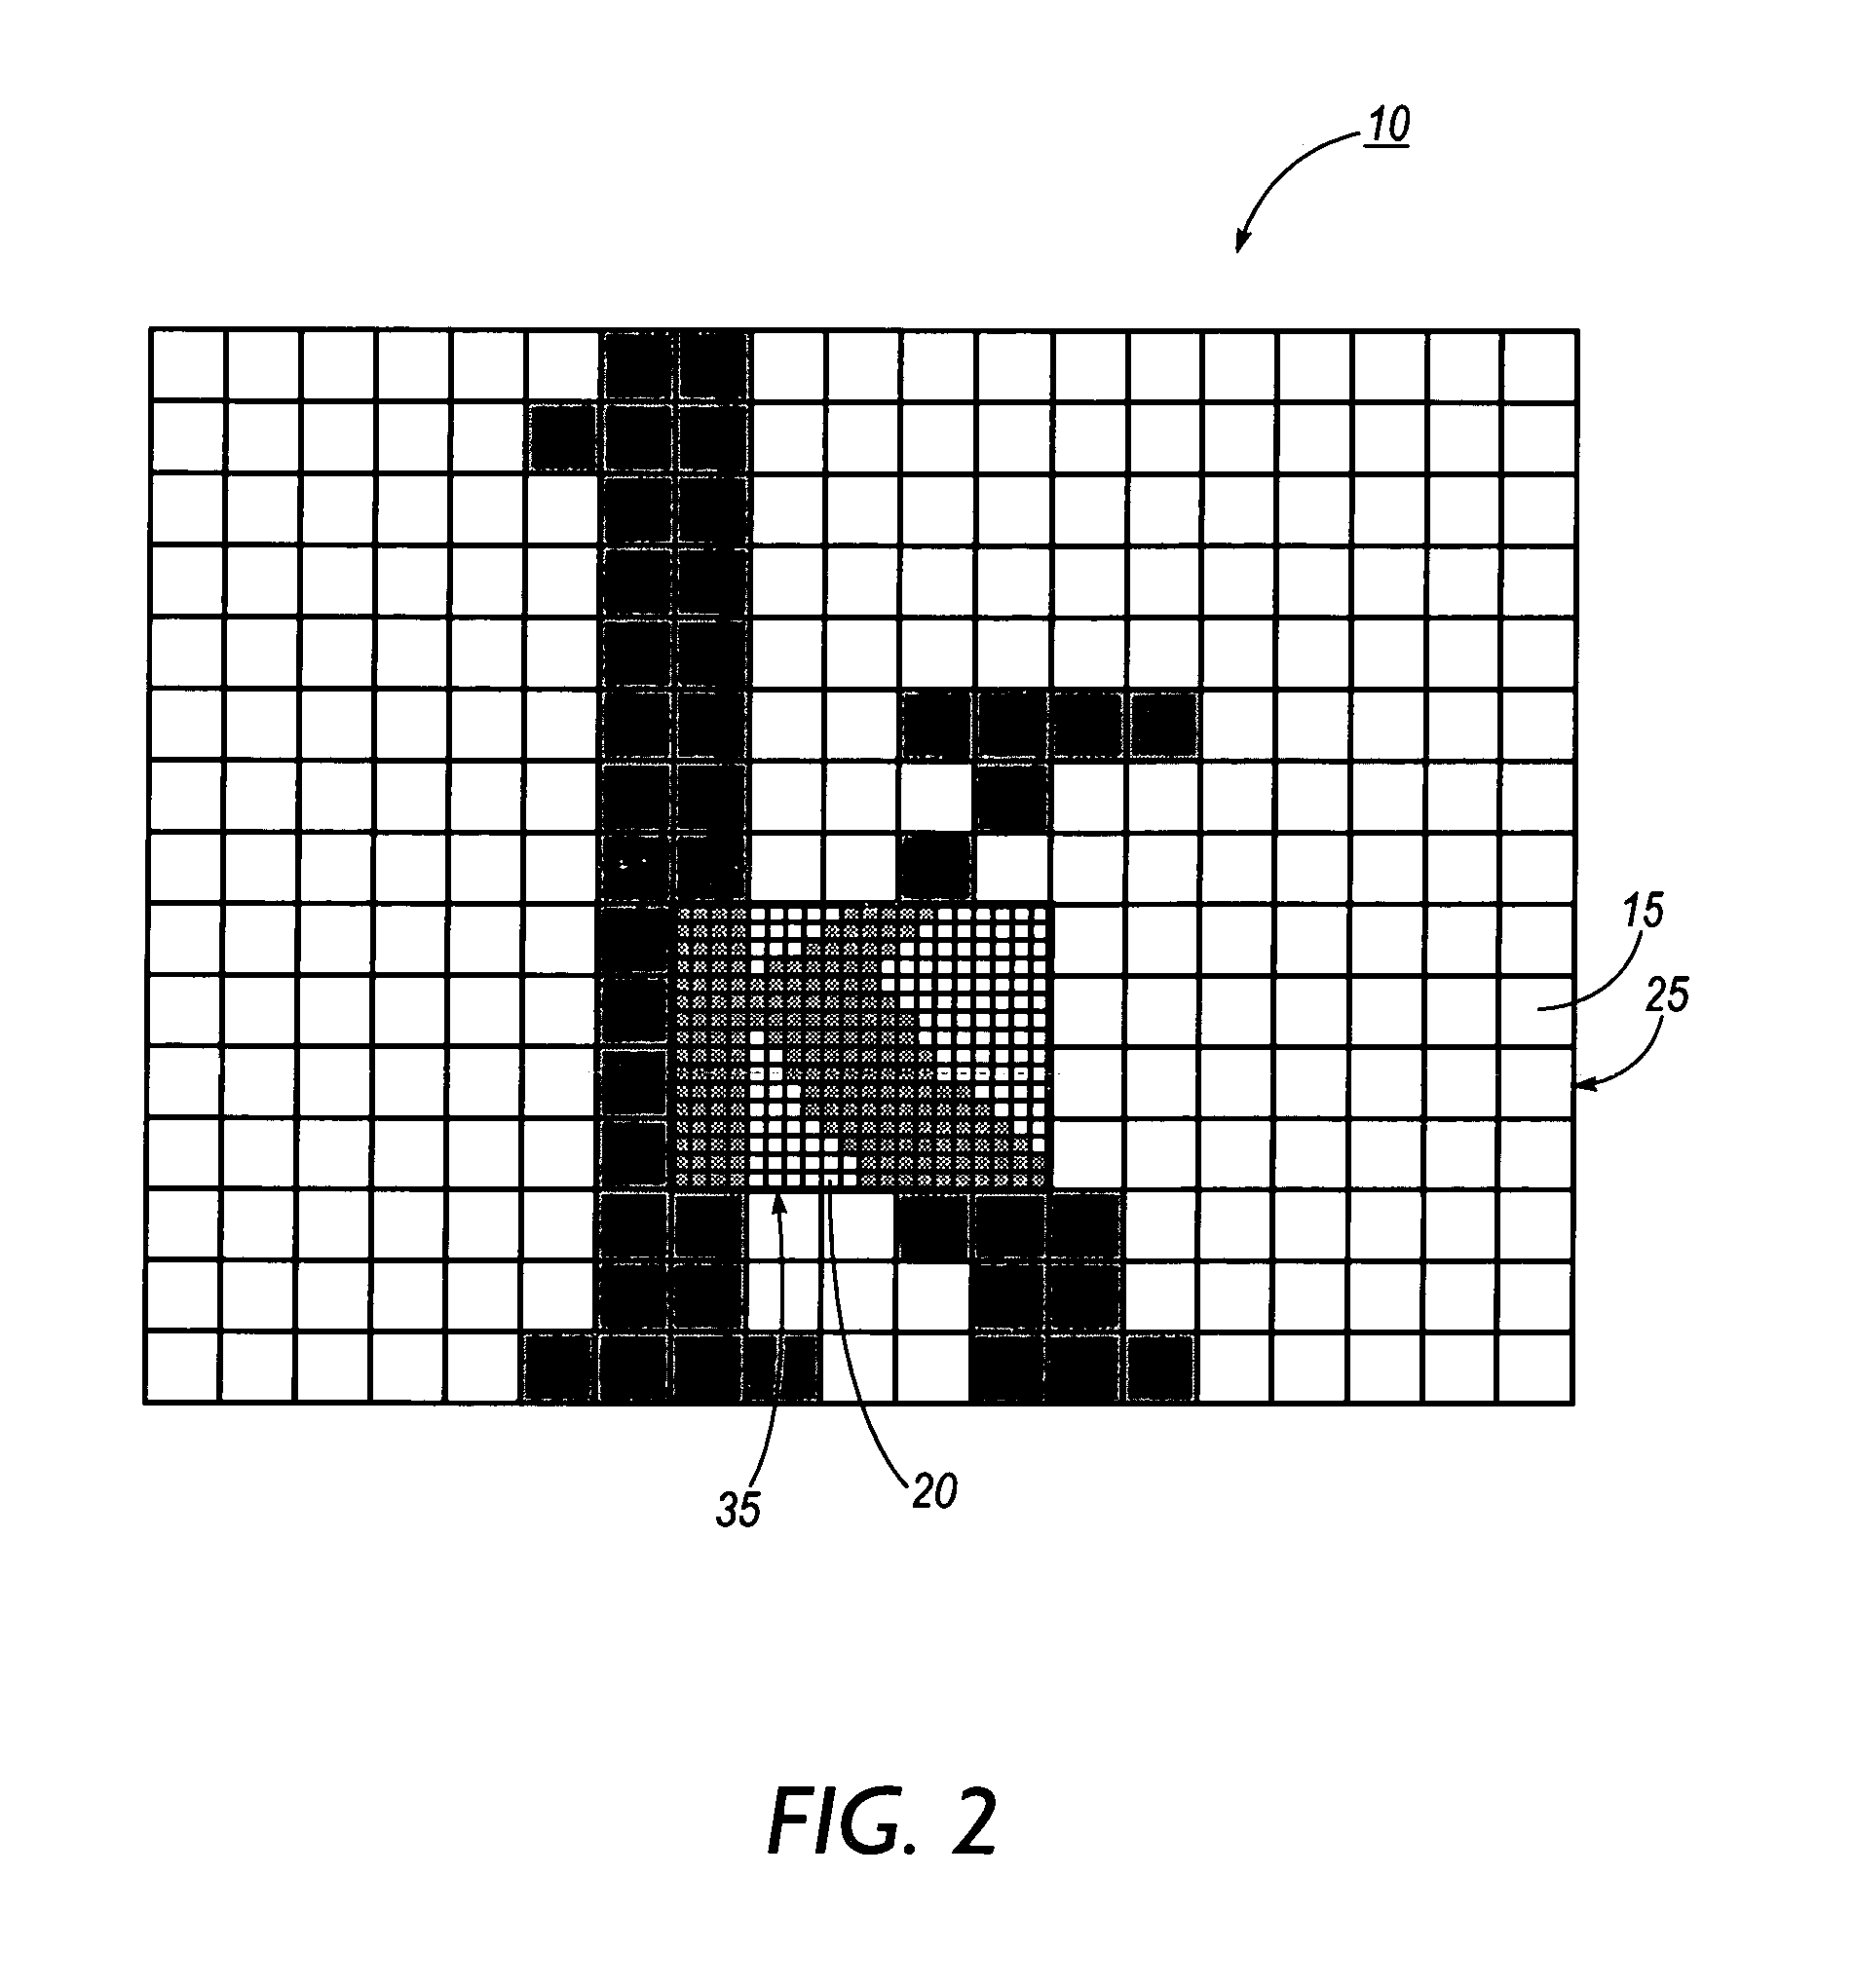 System utilizing mixed resolution displays